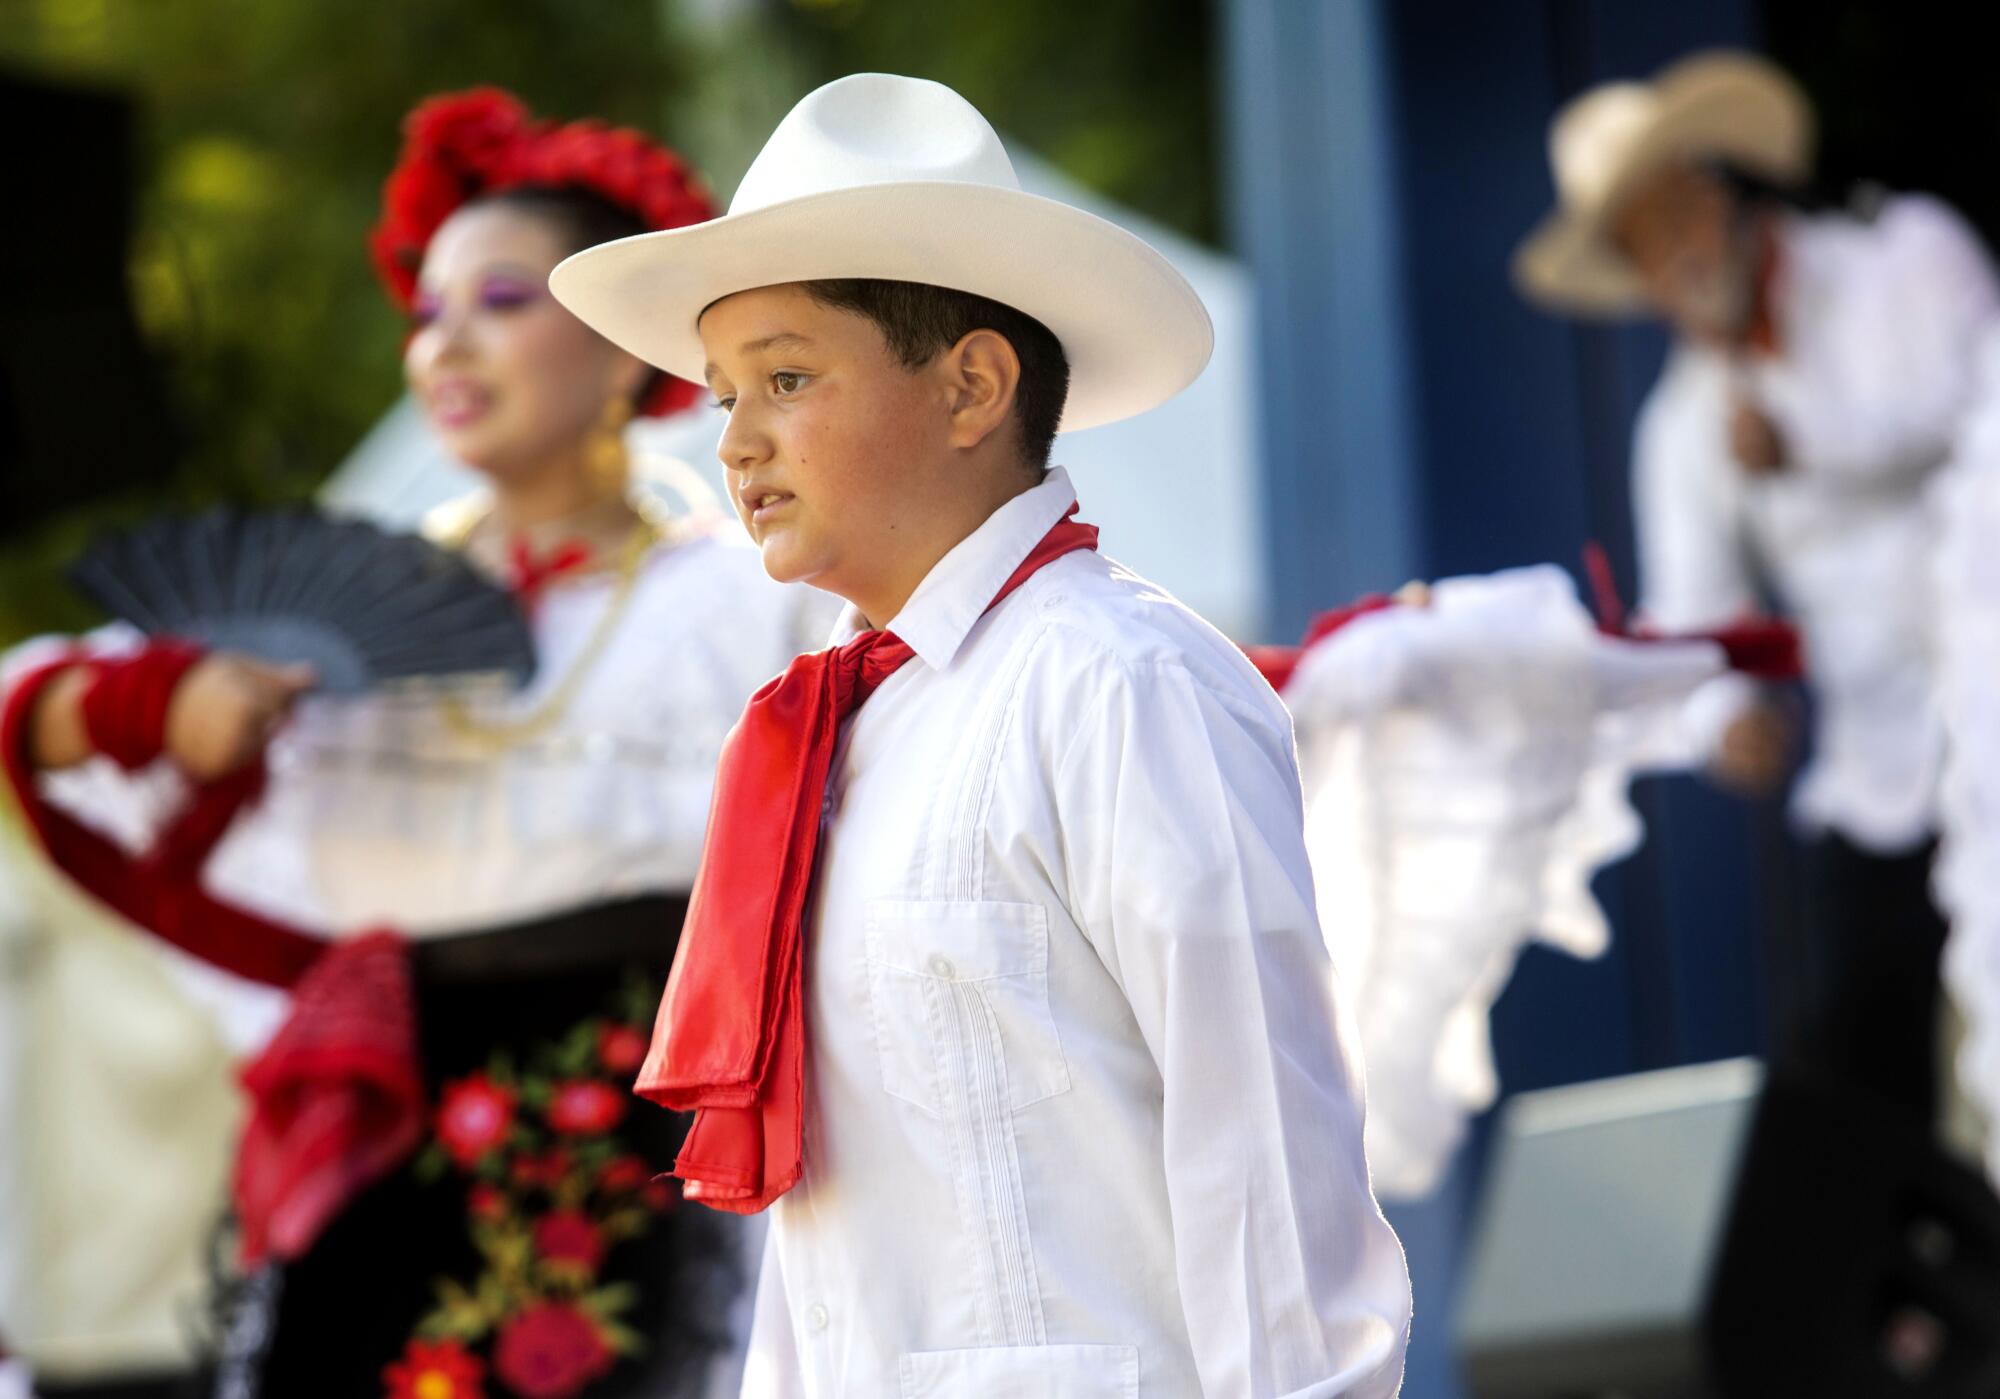 Vincent Mendoza, 10, dances with other dancers. He's wearing a white outfit and a red traditional tie.